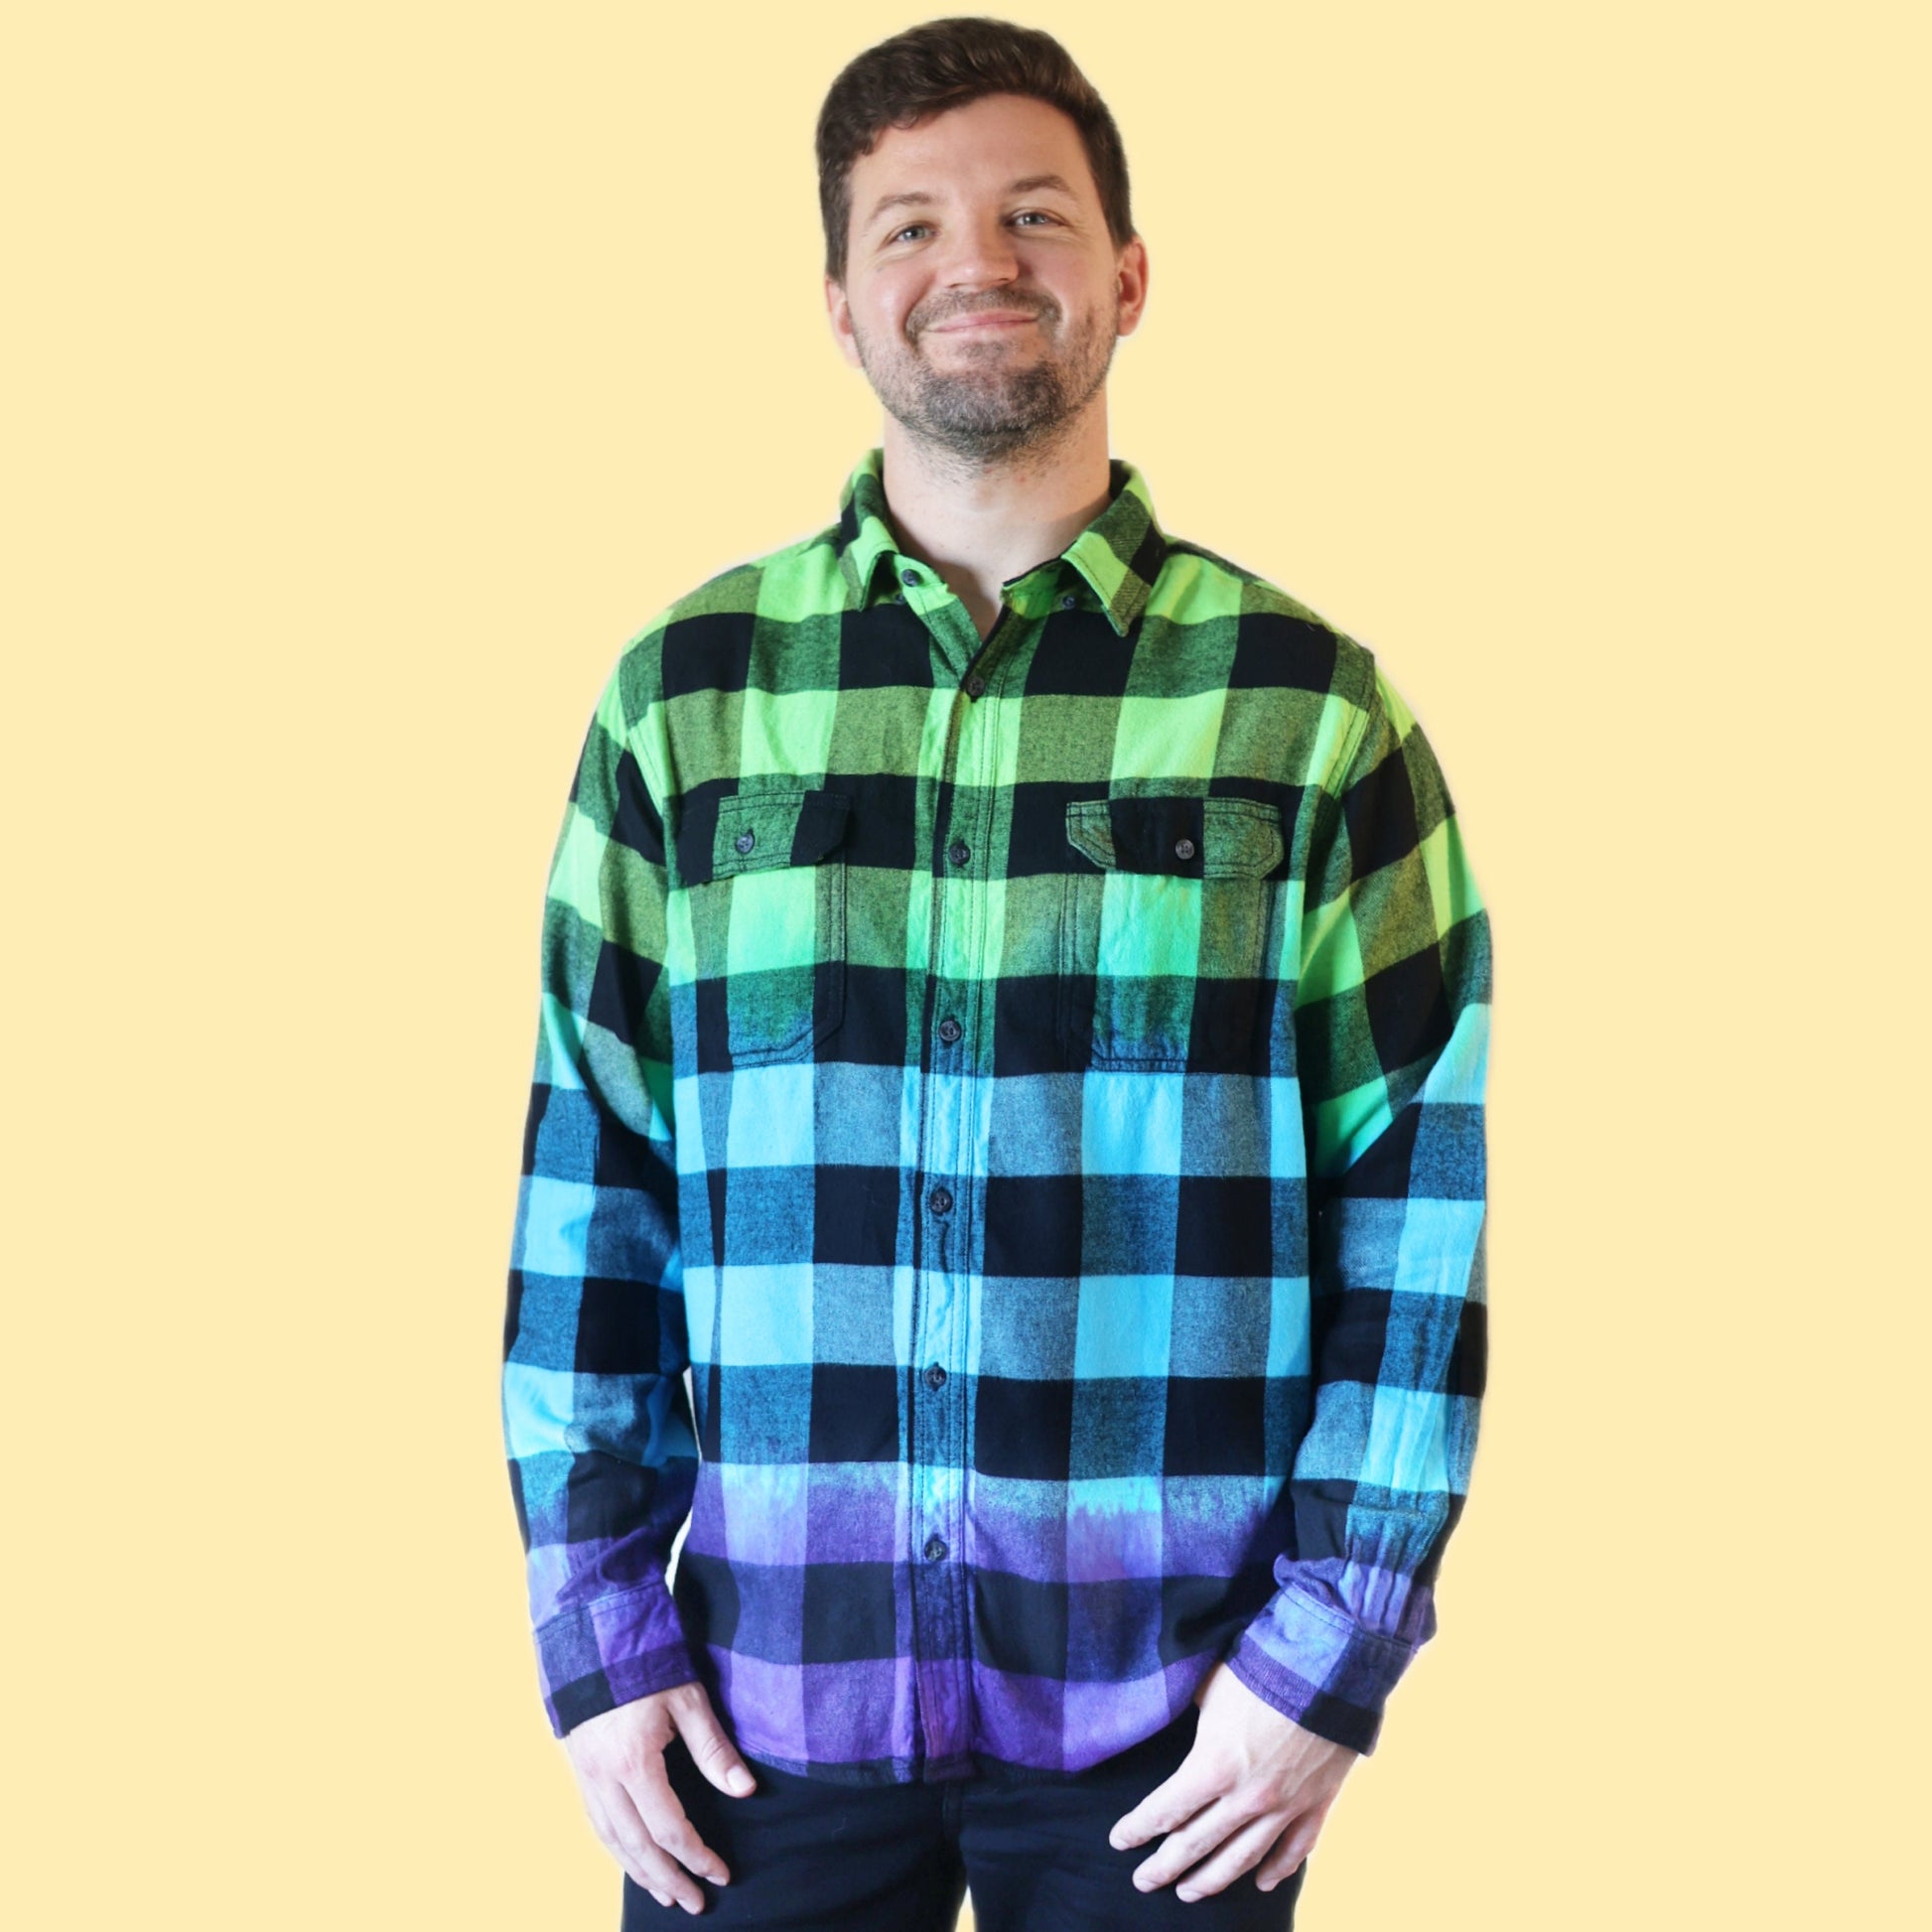 Oversized Neon Green, Blue, Purple Tie Dye Plaid Flannel Shirt. Unique Dip Dye Gradient Flannel is Handmade with quality fiber reactive dyes for vibrant color that lasts.100% Cotton Soft Flannel Fabric, Collar Neckline,  Button Closure, Long Sleeves, front pocket, Machine washable, for men and women